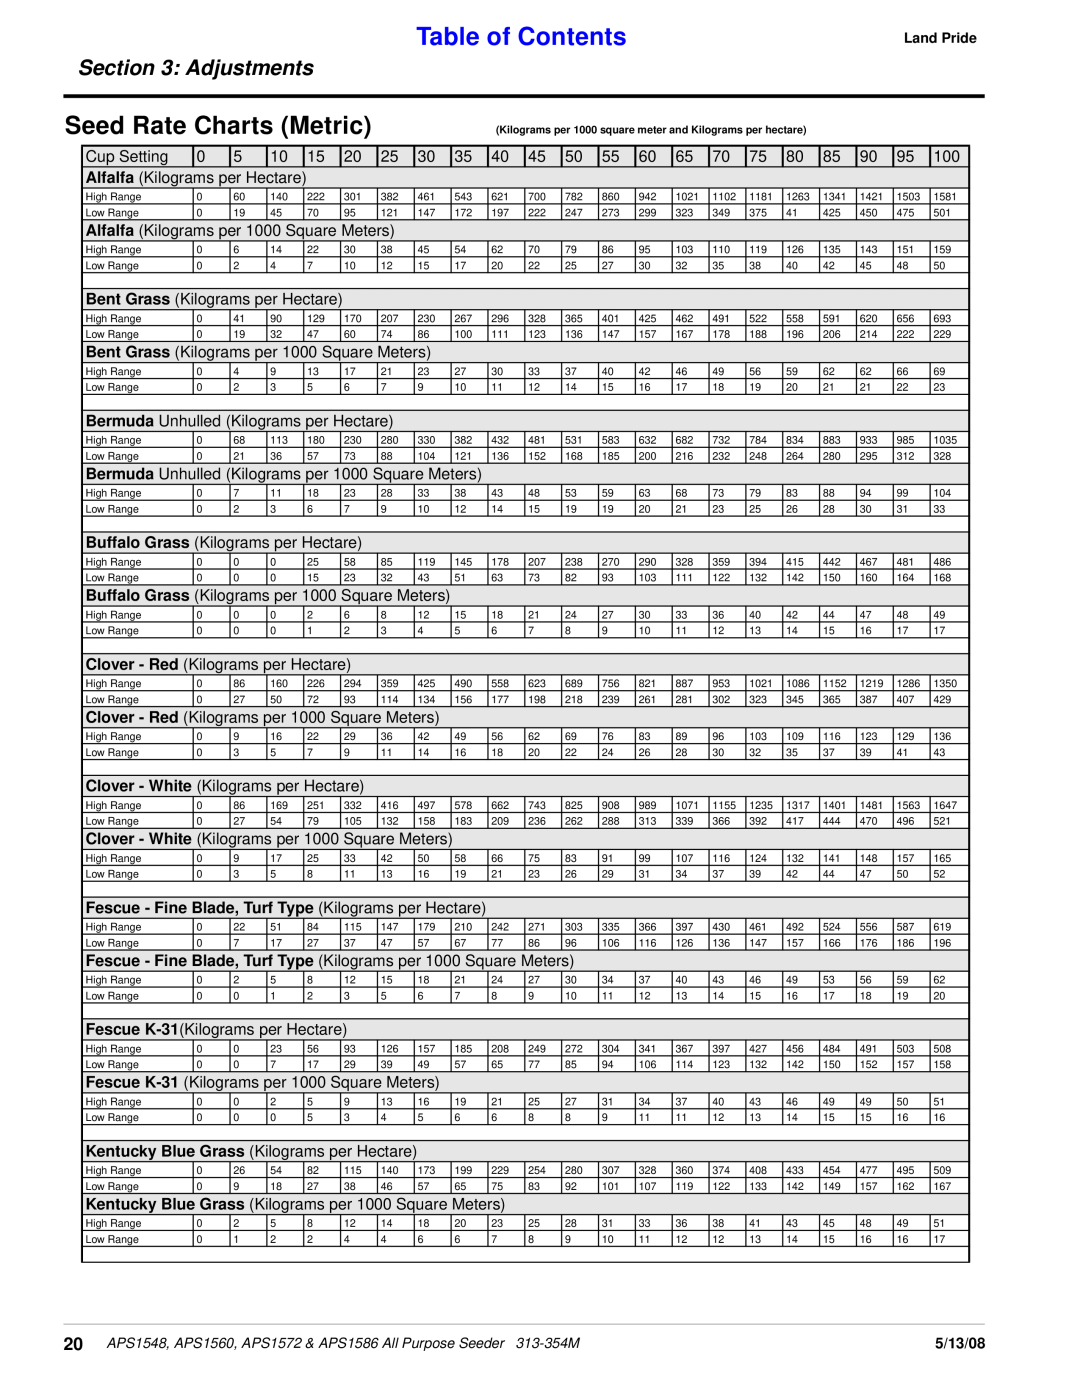 Land Pride APS1586, APS1560, APS1572, APS1548 manual Seed Rate Charts Metric, Table of Contents, Adjustments 